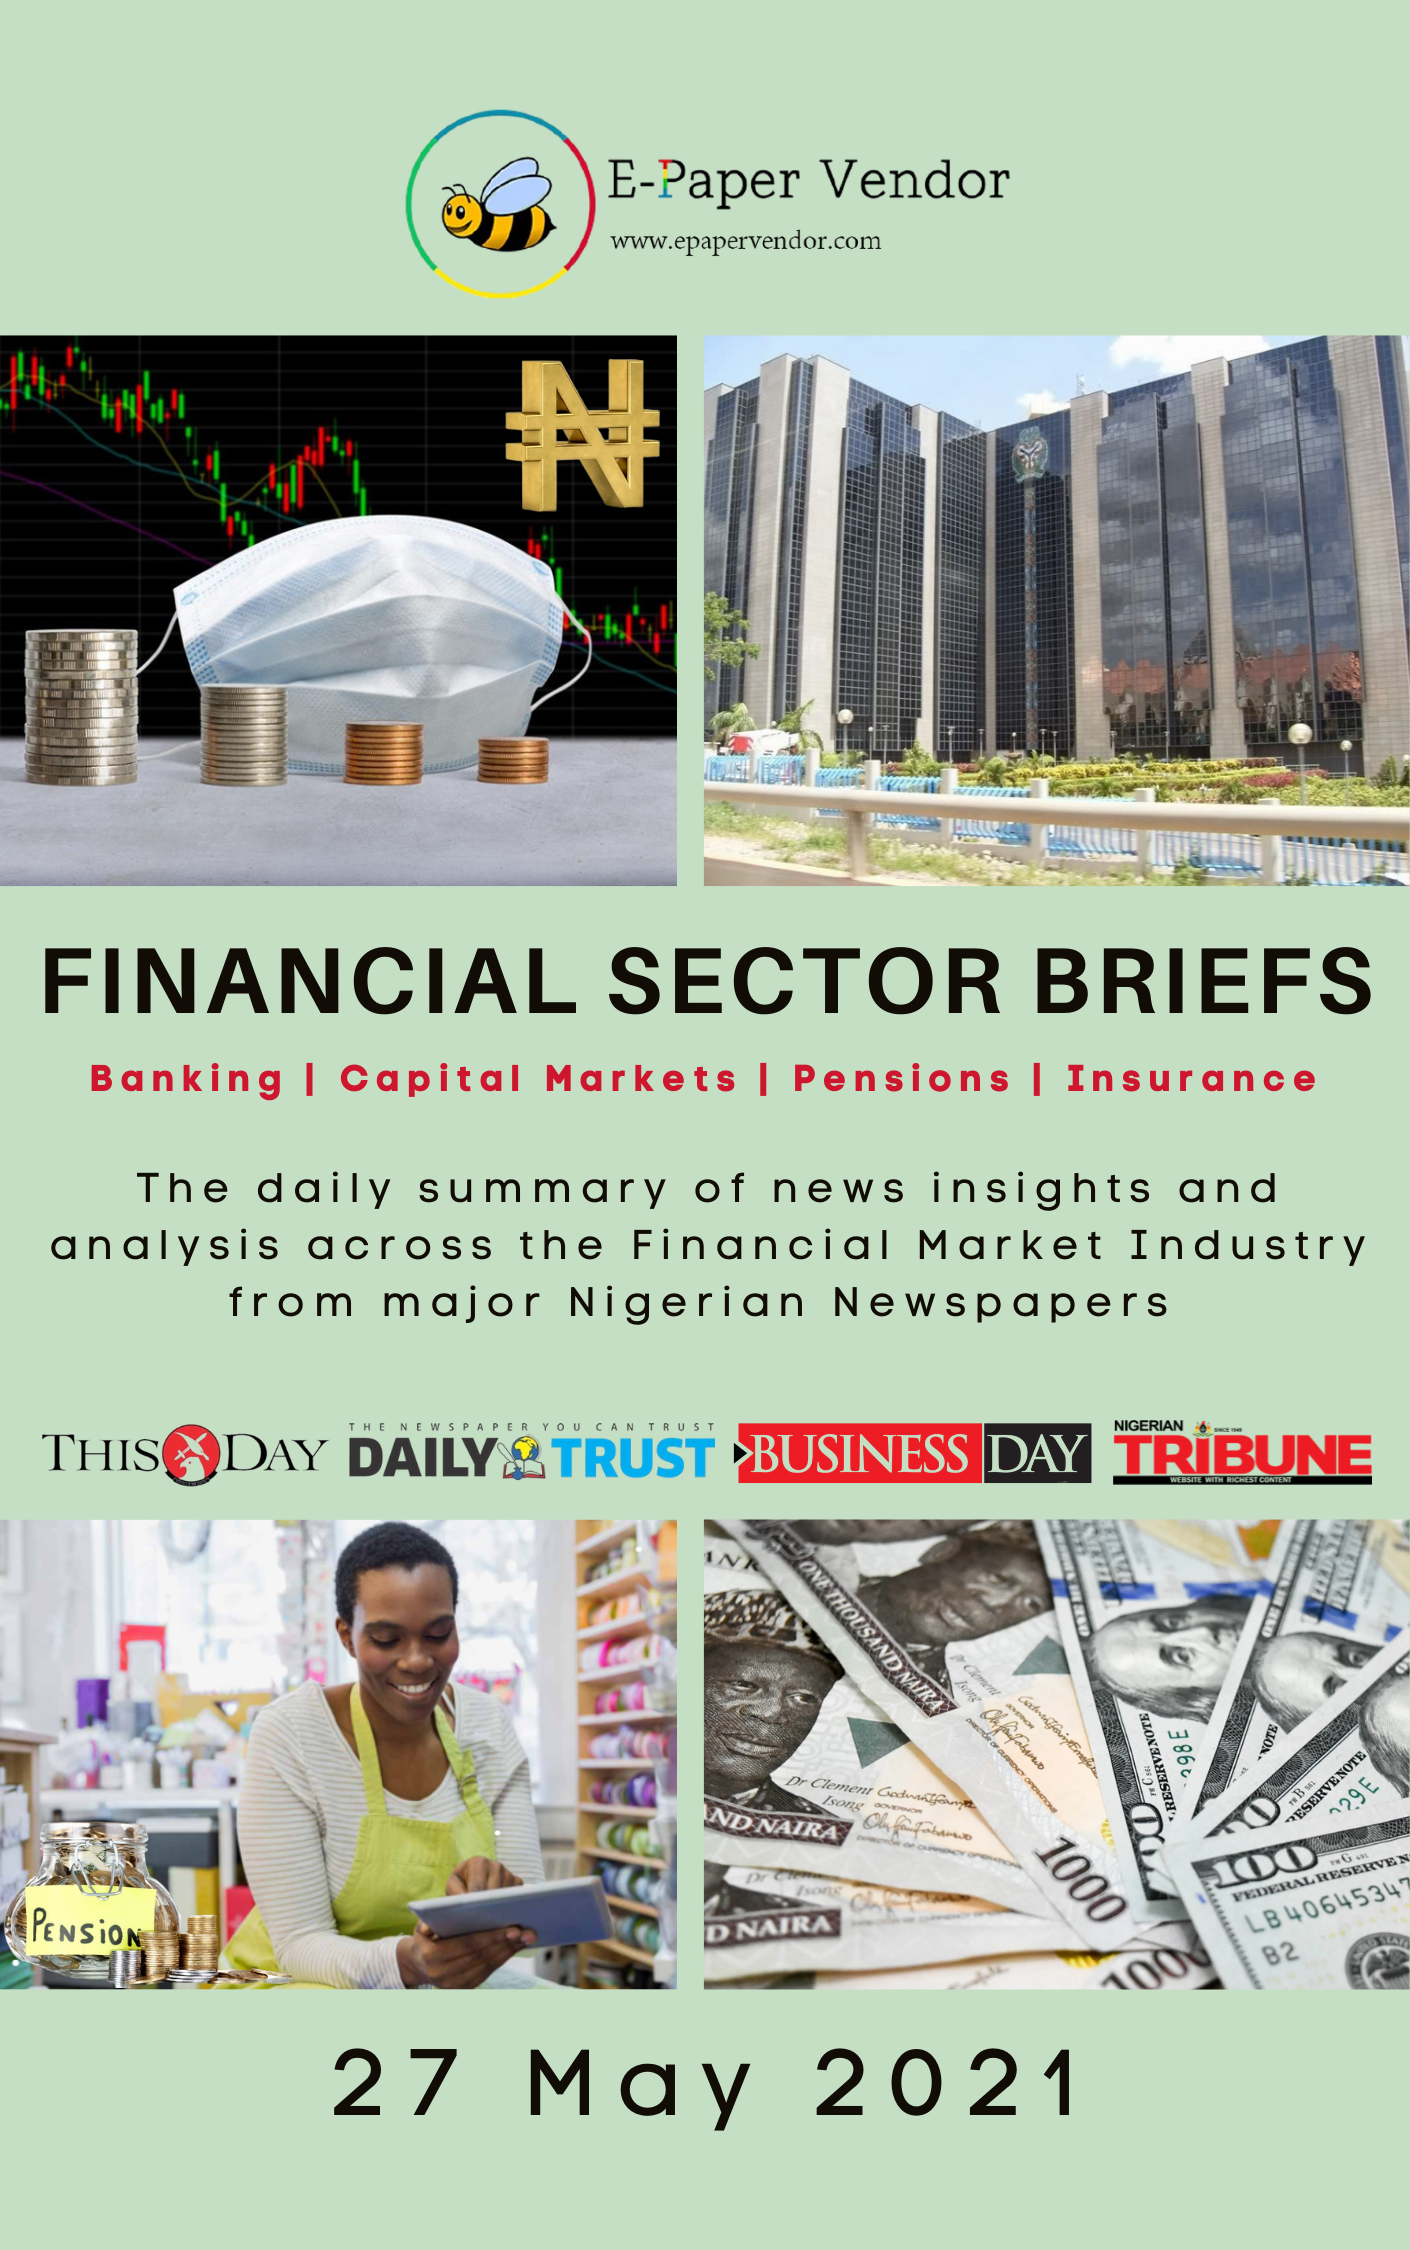 FINANCIAL SECTOR BRIEFS (27 MAY 2021)